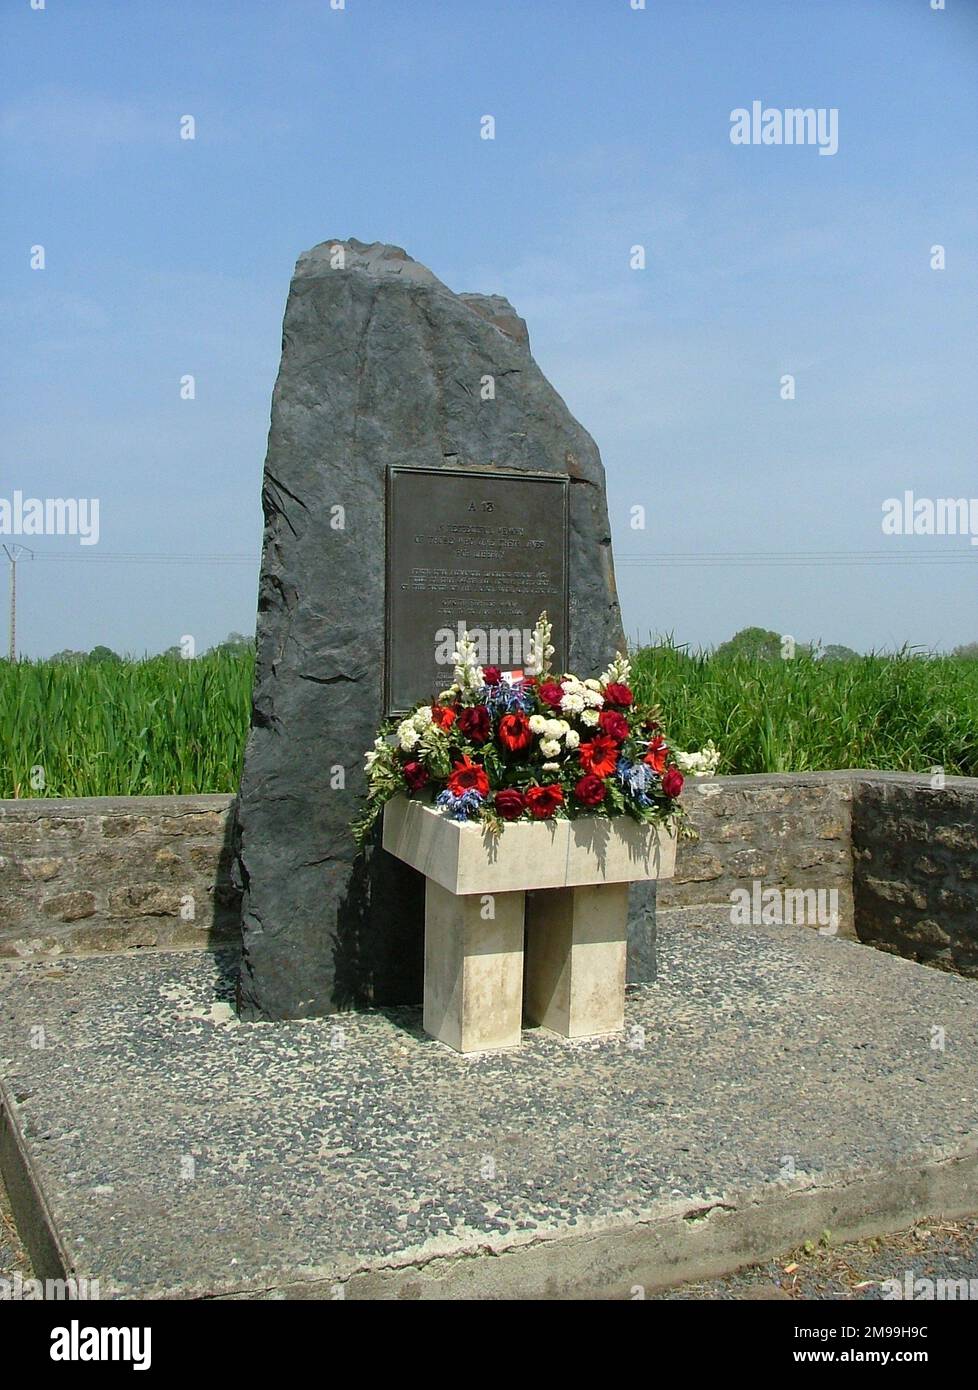 The Airfield was built by the 864th US Air Engineers Battalion & the Memorial was unveiled on 6 June 1989. The Franco-American 9th Airforce Normandy Airfields Association has marked all the 9th USAAF airstrips. Stock Photo